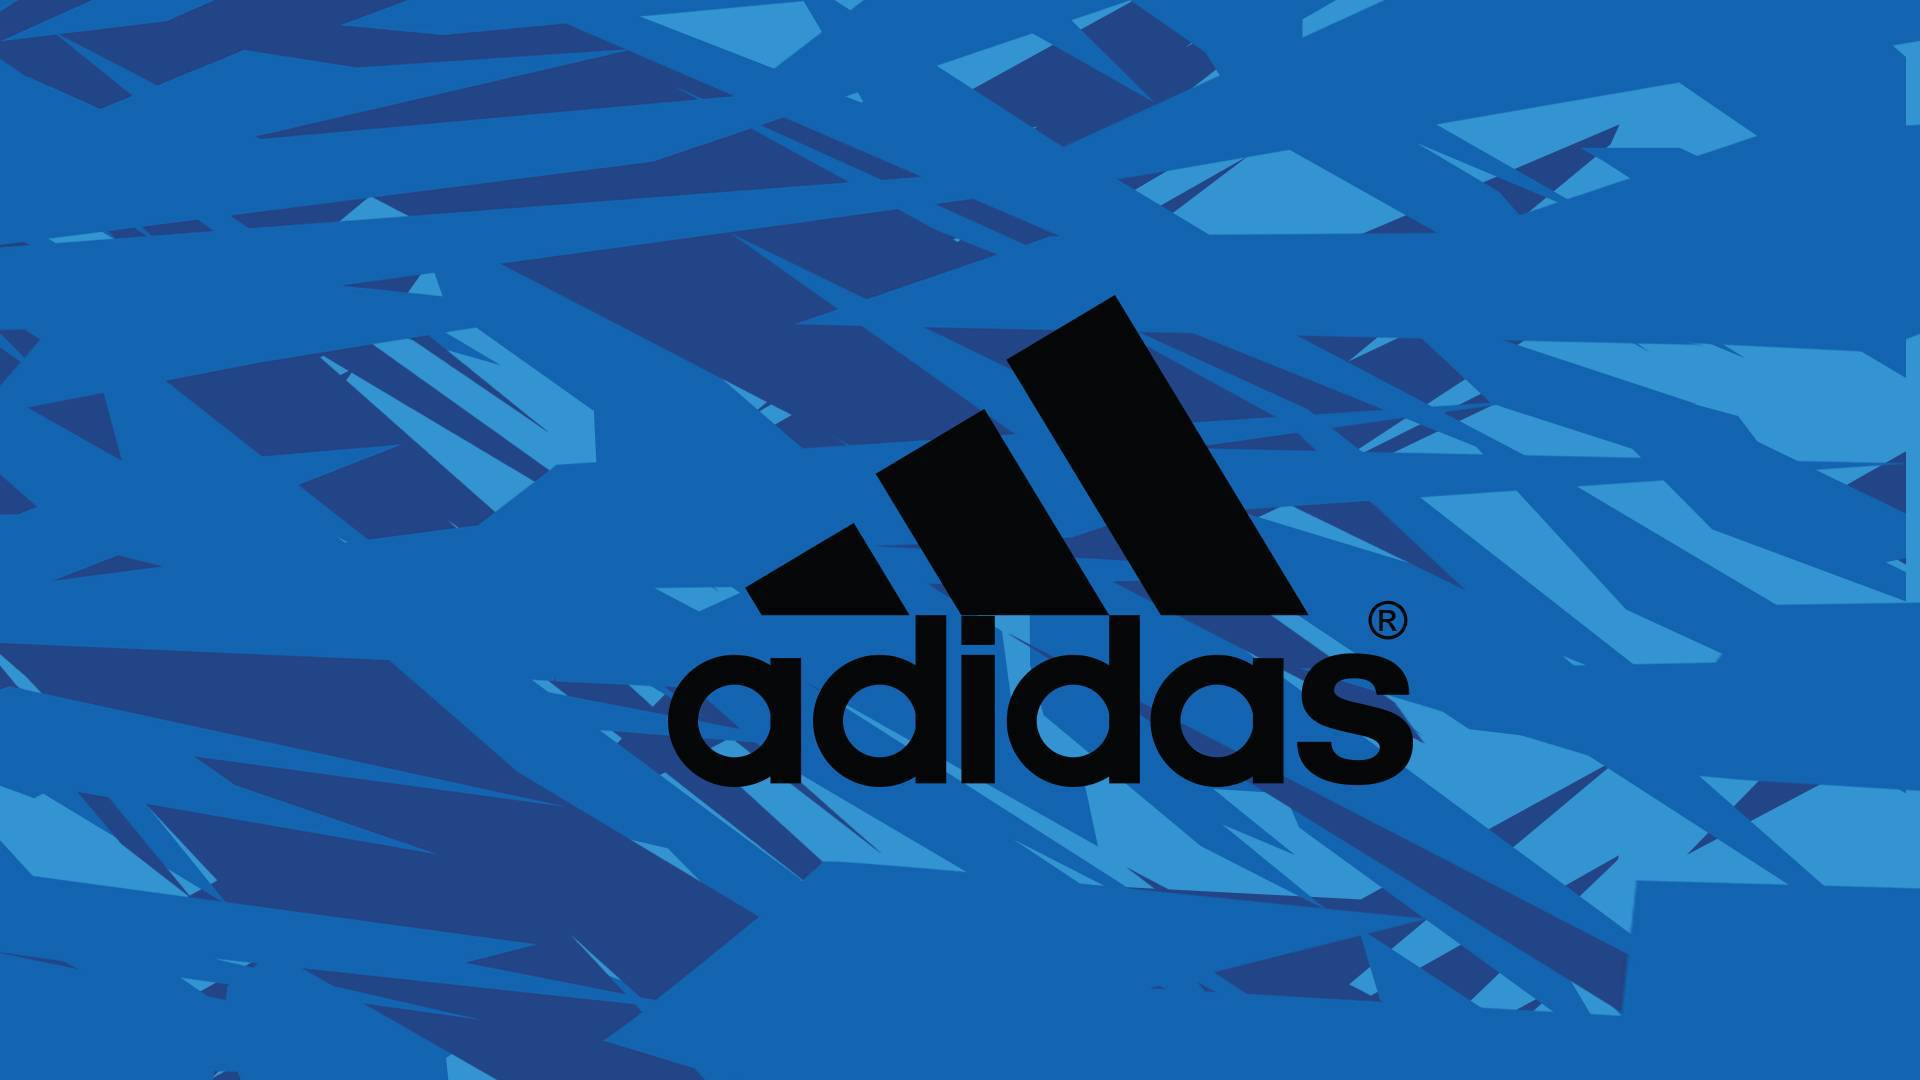 Adidas Wallpaper Image Photos Pictures Background